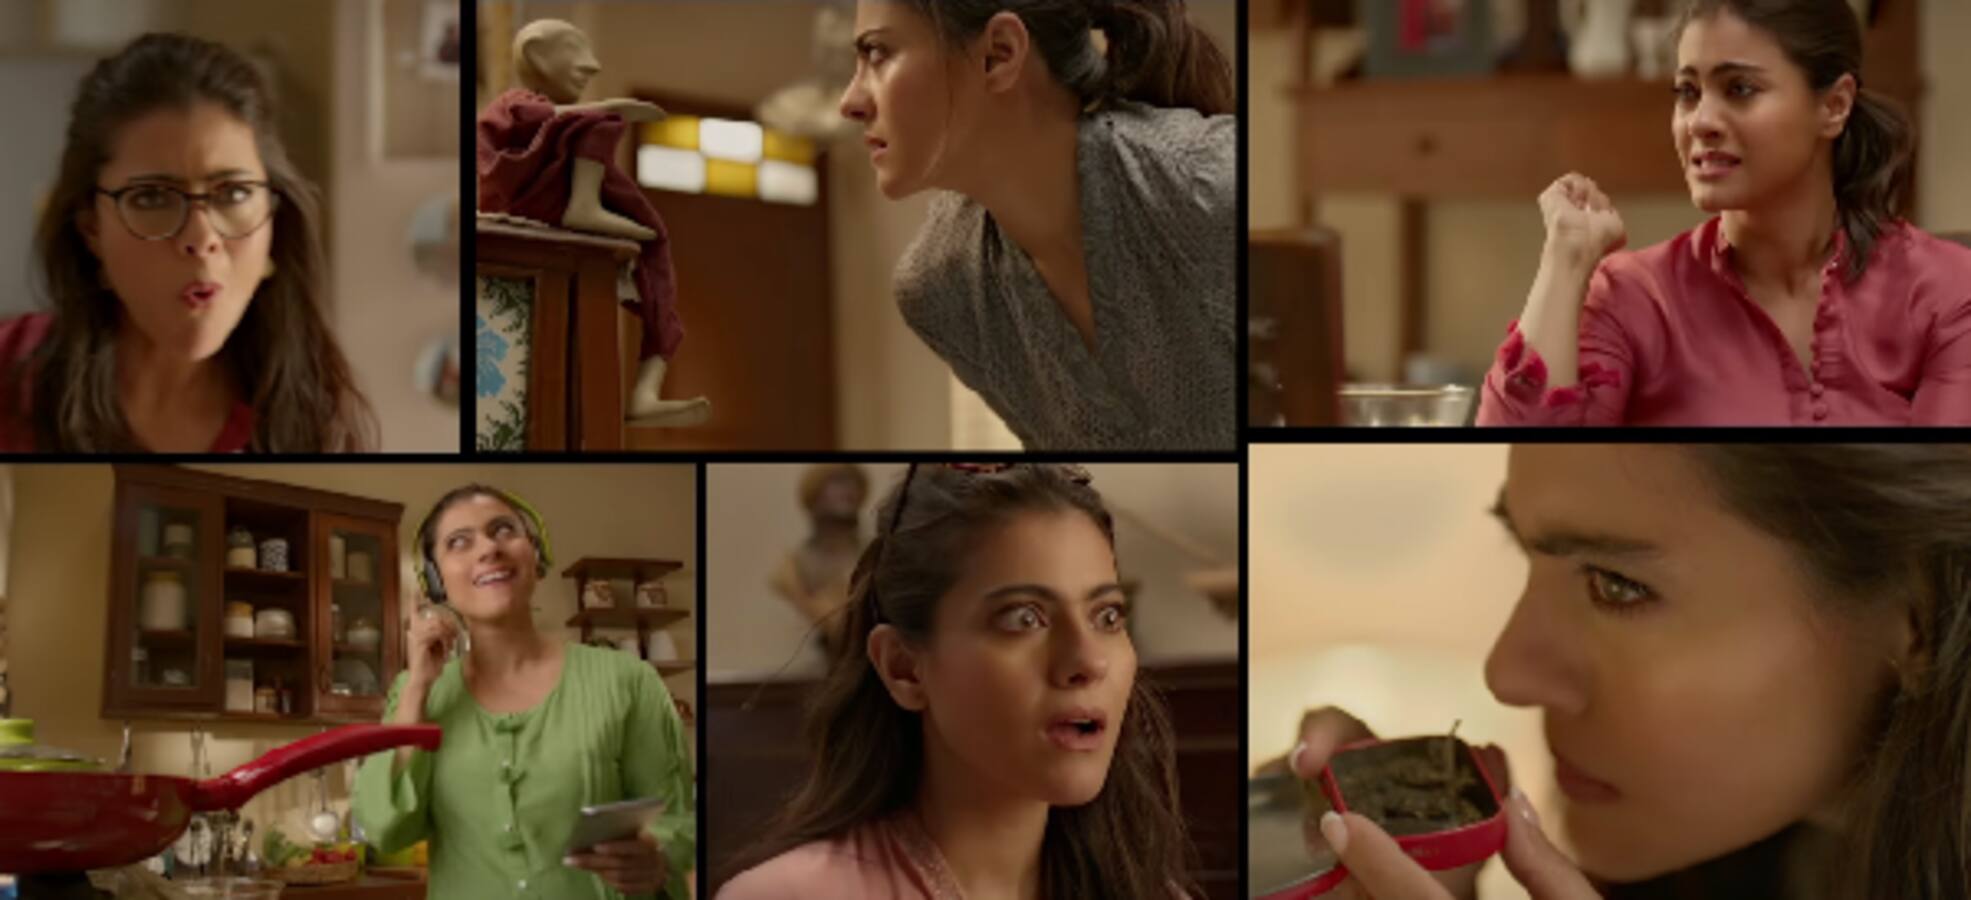 Helicopter Eela trailer: Kajol's endearing mother act hits home - watch video